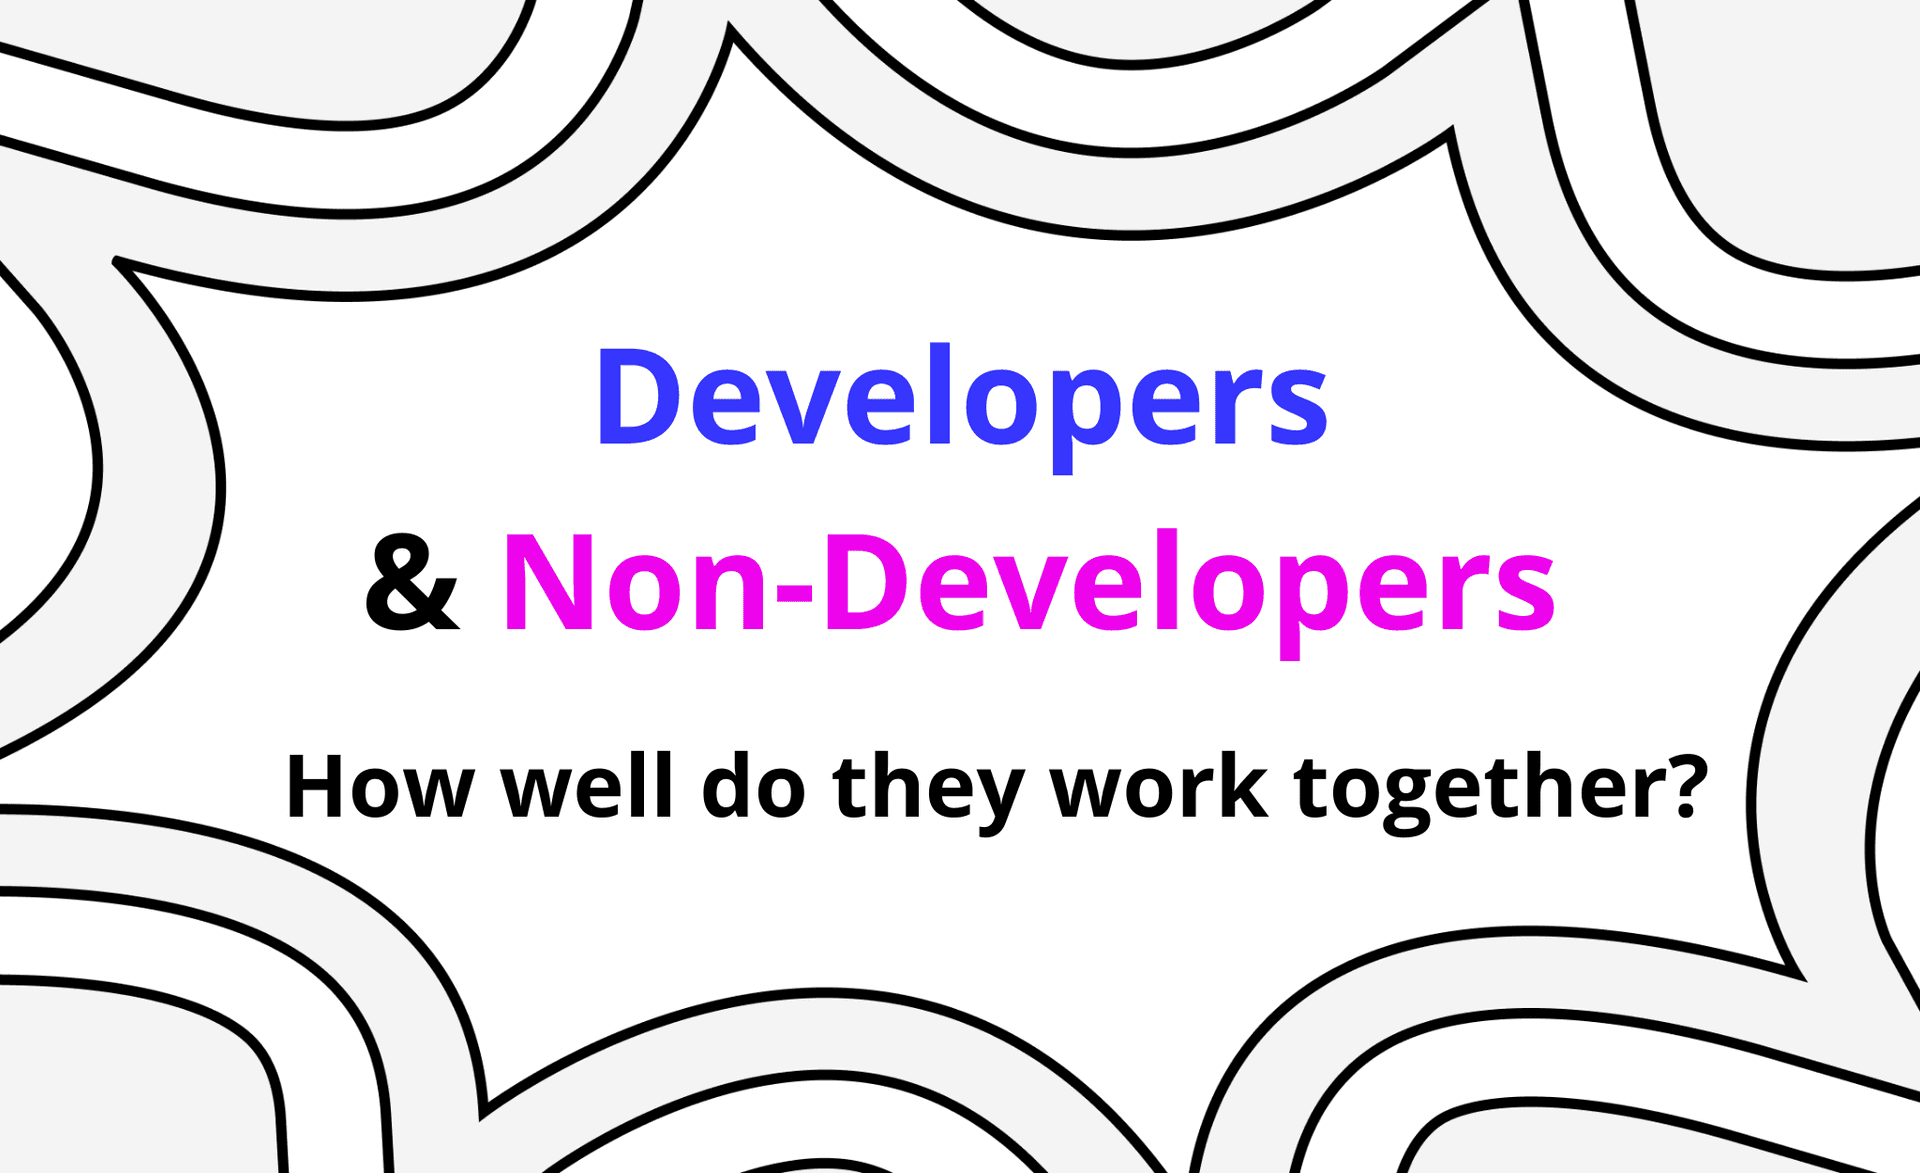 How well do developers and non-developers work together? We asked 200 dev teams about it